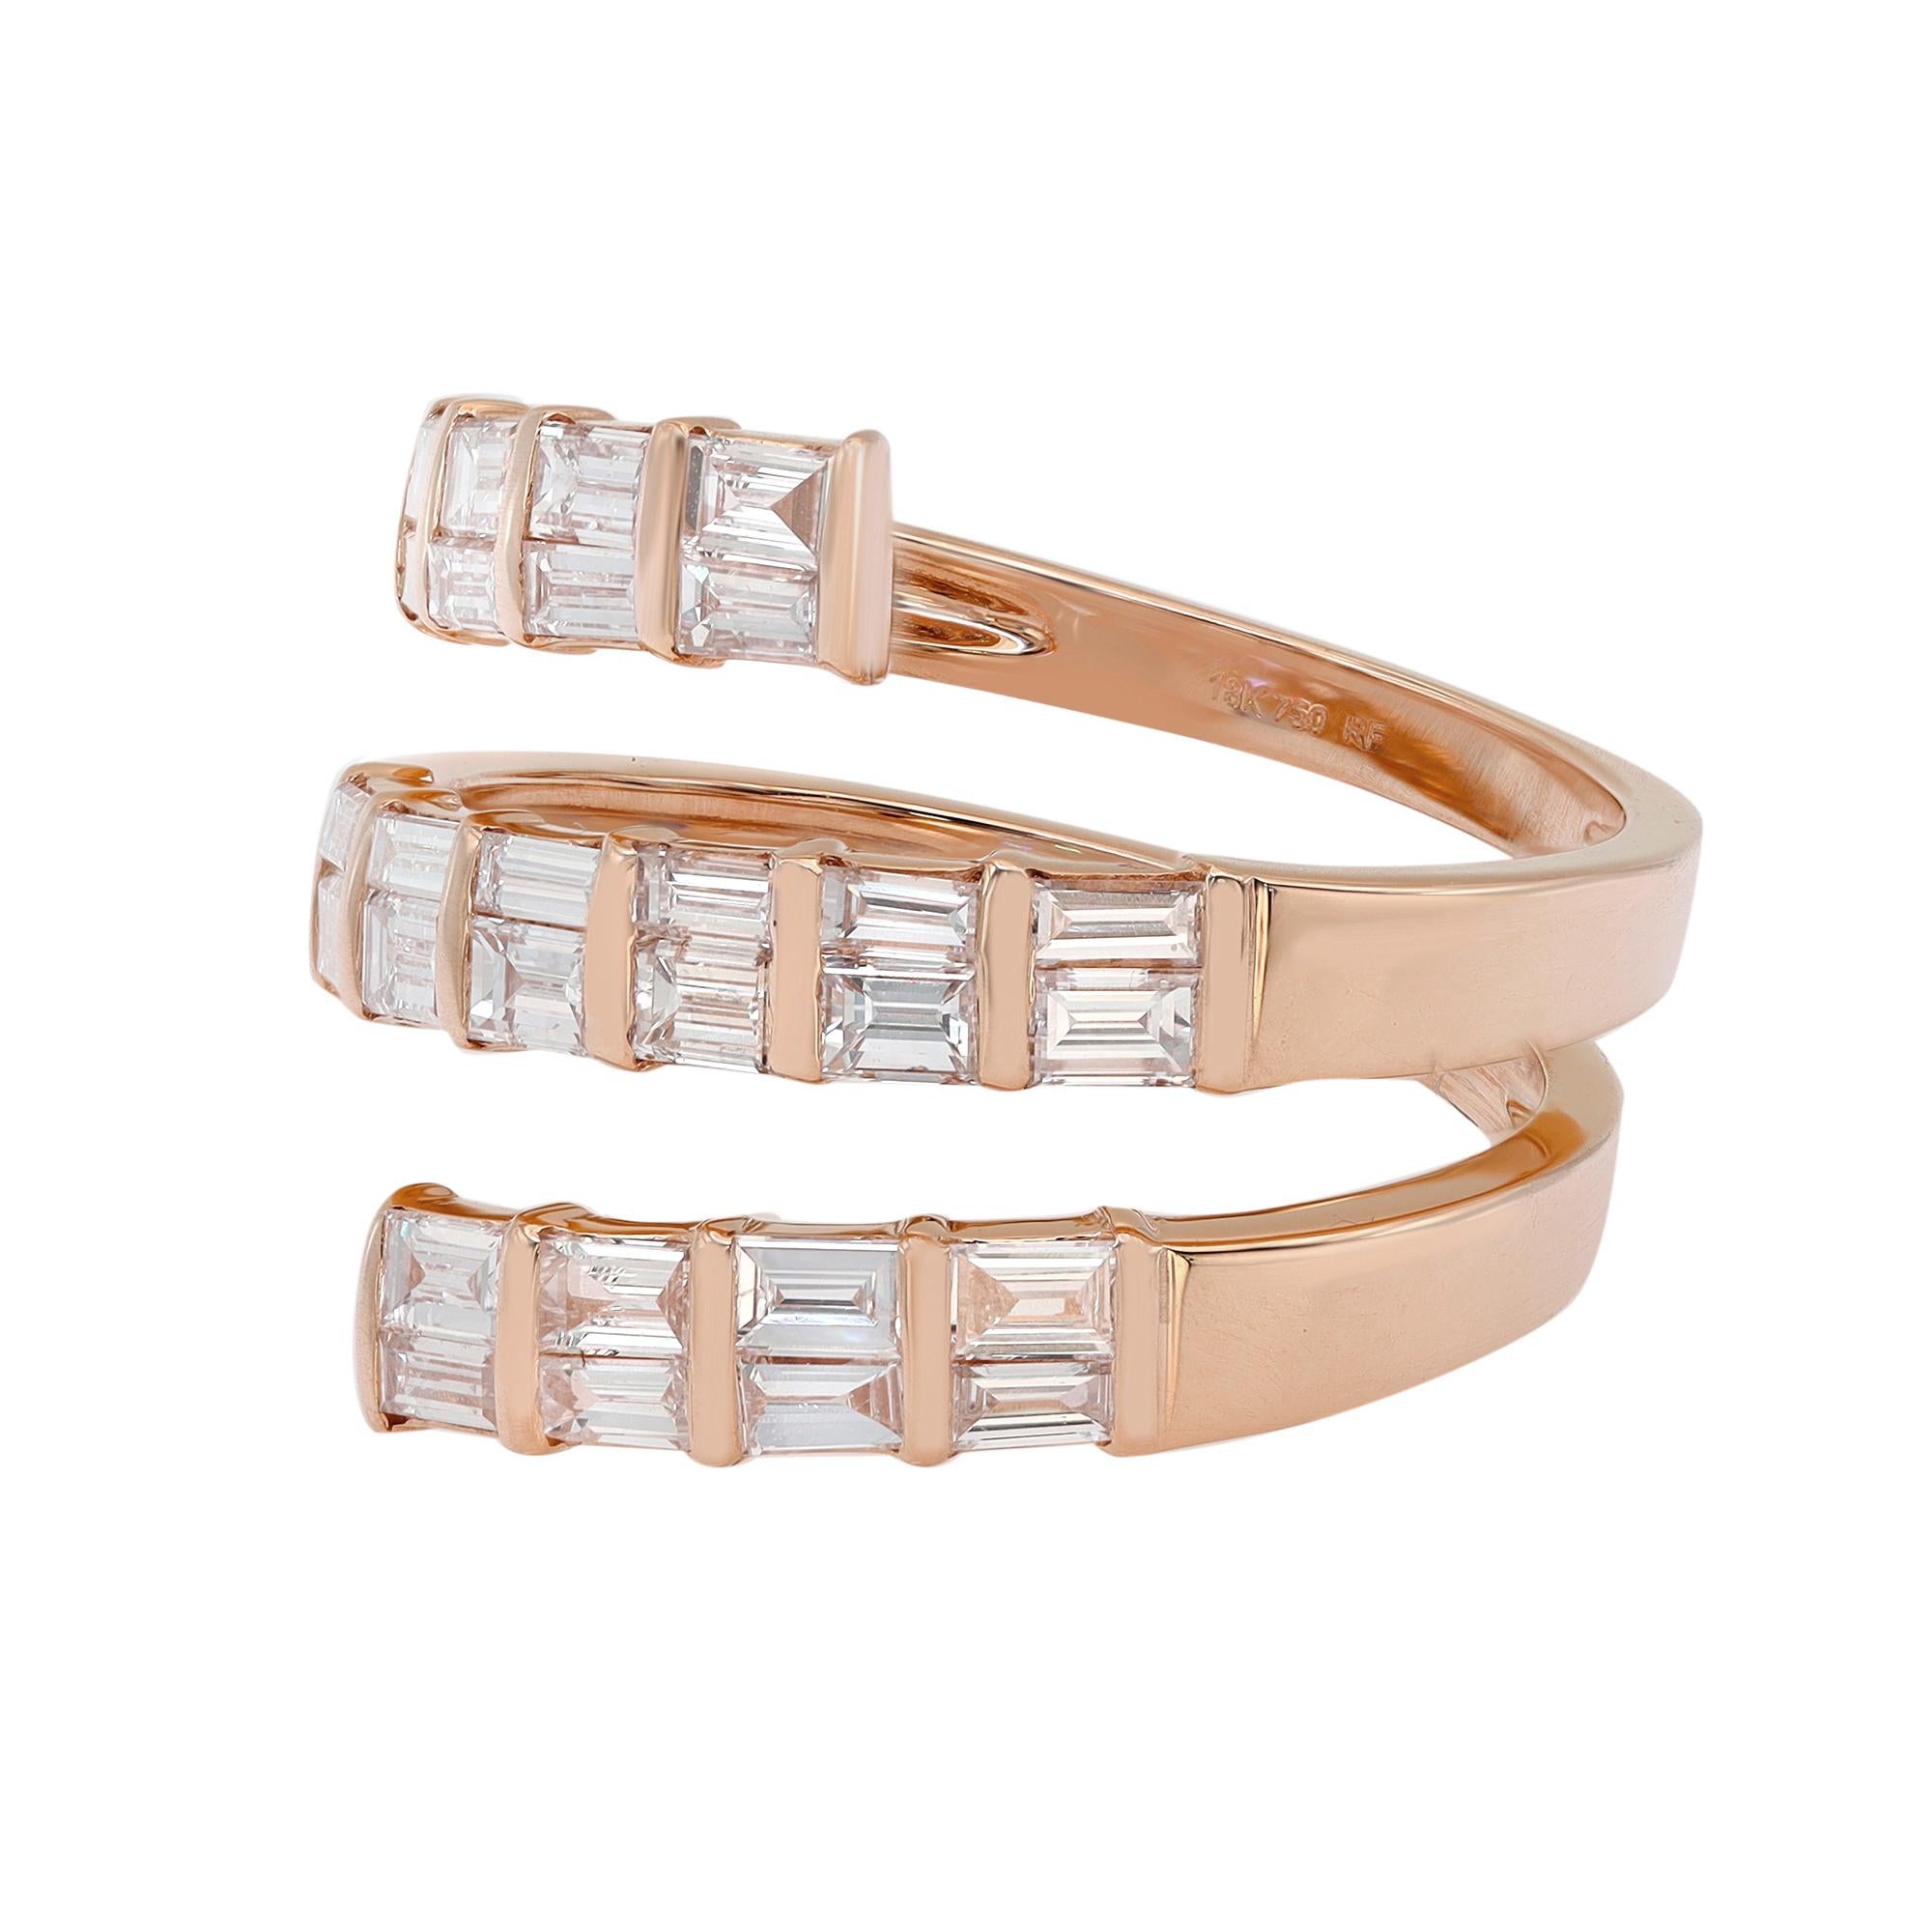 This beautiful spiral diamond ring is all about sparkle. Crafted in high polished 18k rose gold. This style features multi rows of baguette cut shimmering diamonds in channel setting. Total diamond weight: 1.25 carats. Diamond quality: G-H color and